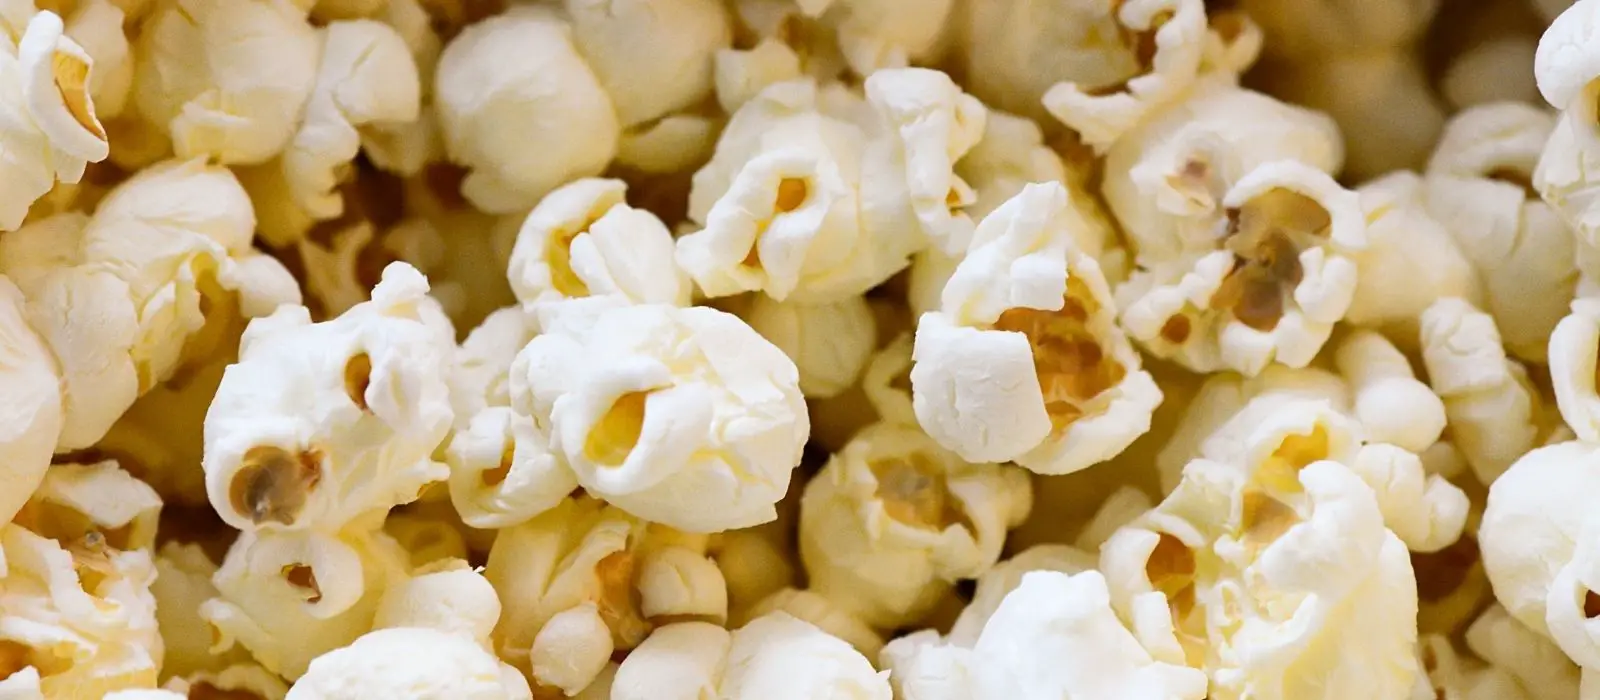 Where Does Popcorn Come From?